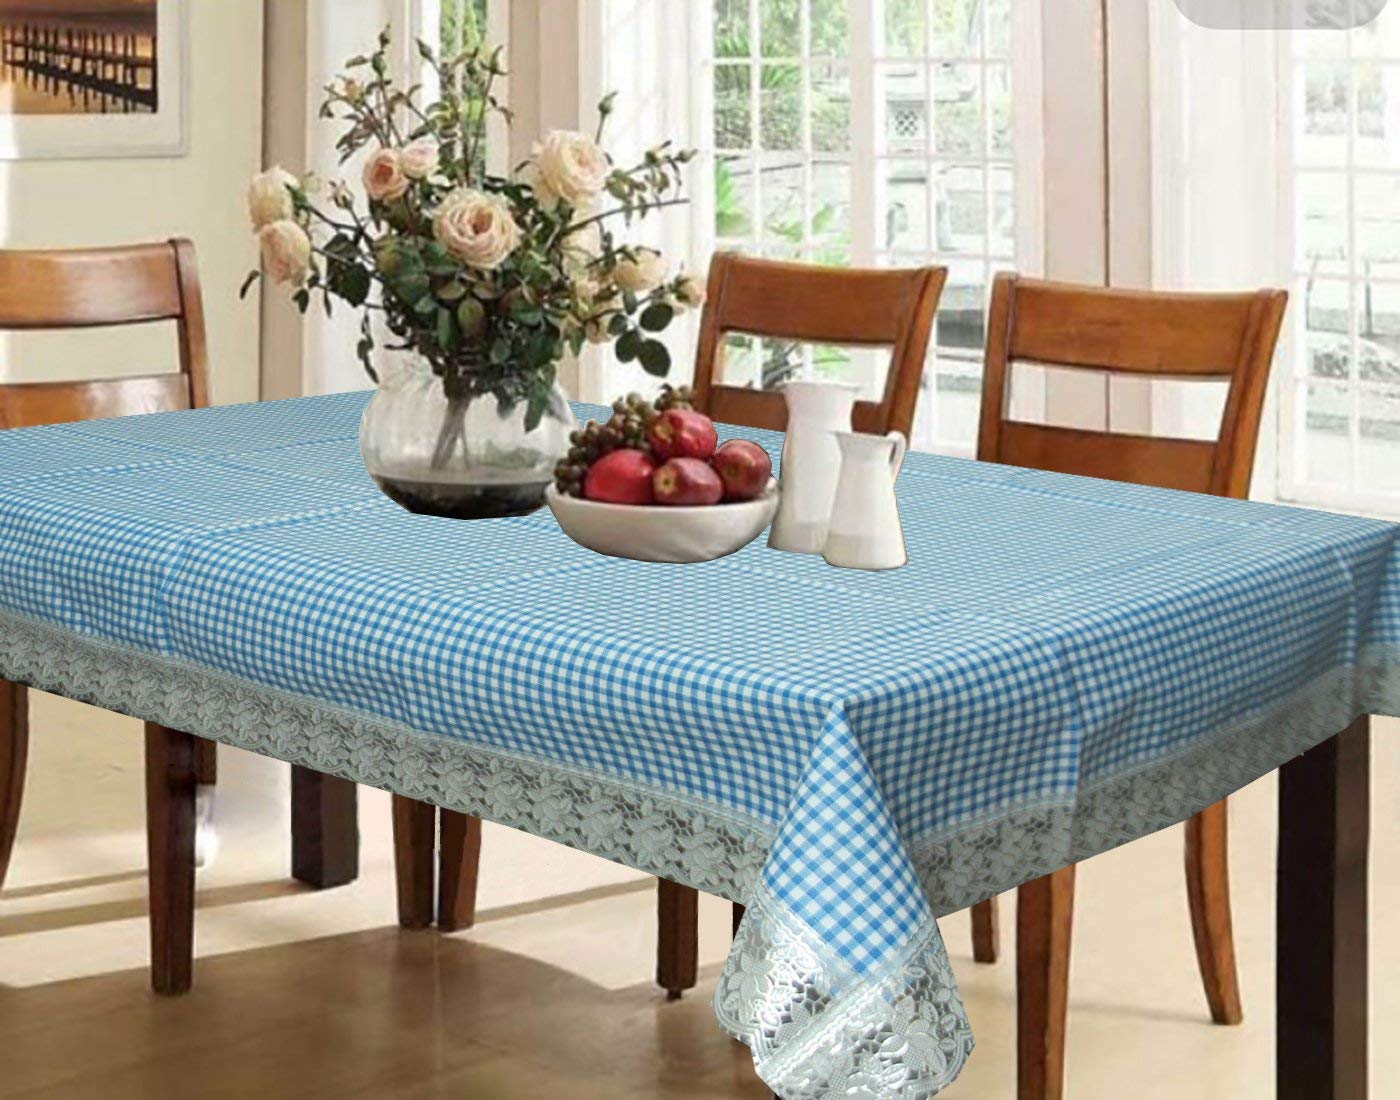 Kuber Industries Waterproof PVC 6 Seater Dining Table Cover (Blue, 60 inch x 89 inch or 152 cm x 225 cm)